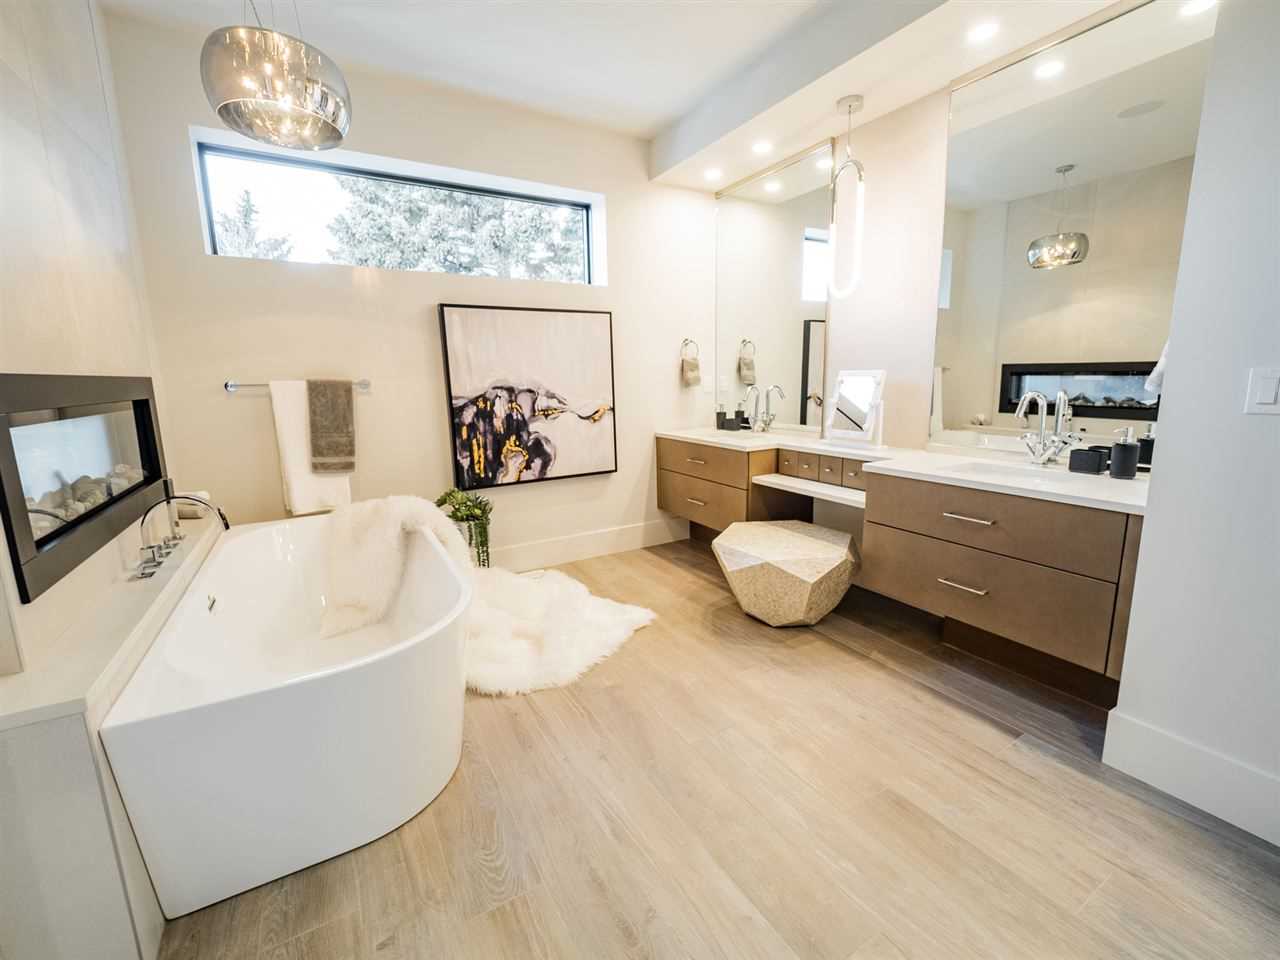 Interior en suite bathroom with white oak floor, white ceiling and walls; his-and-her sinks above brown wood drawers on the right; rectangular window at head height on back wall; white soaker tub against two-way fireplace on the left